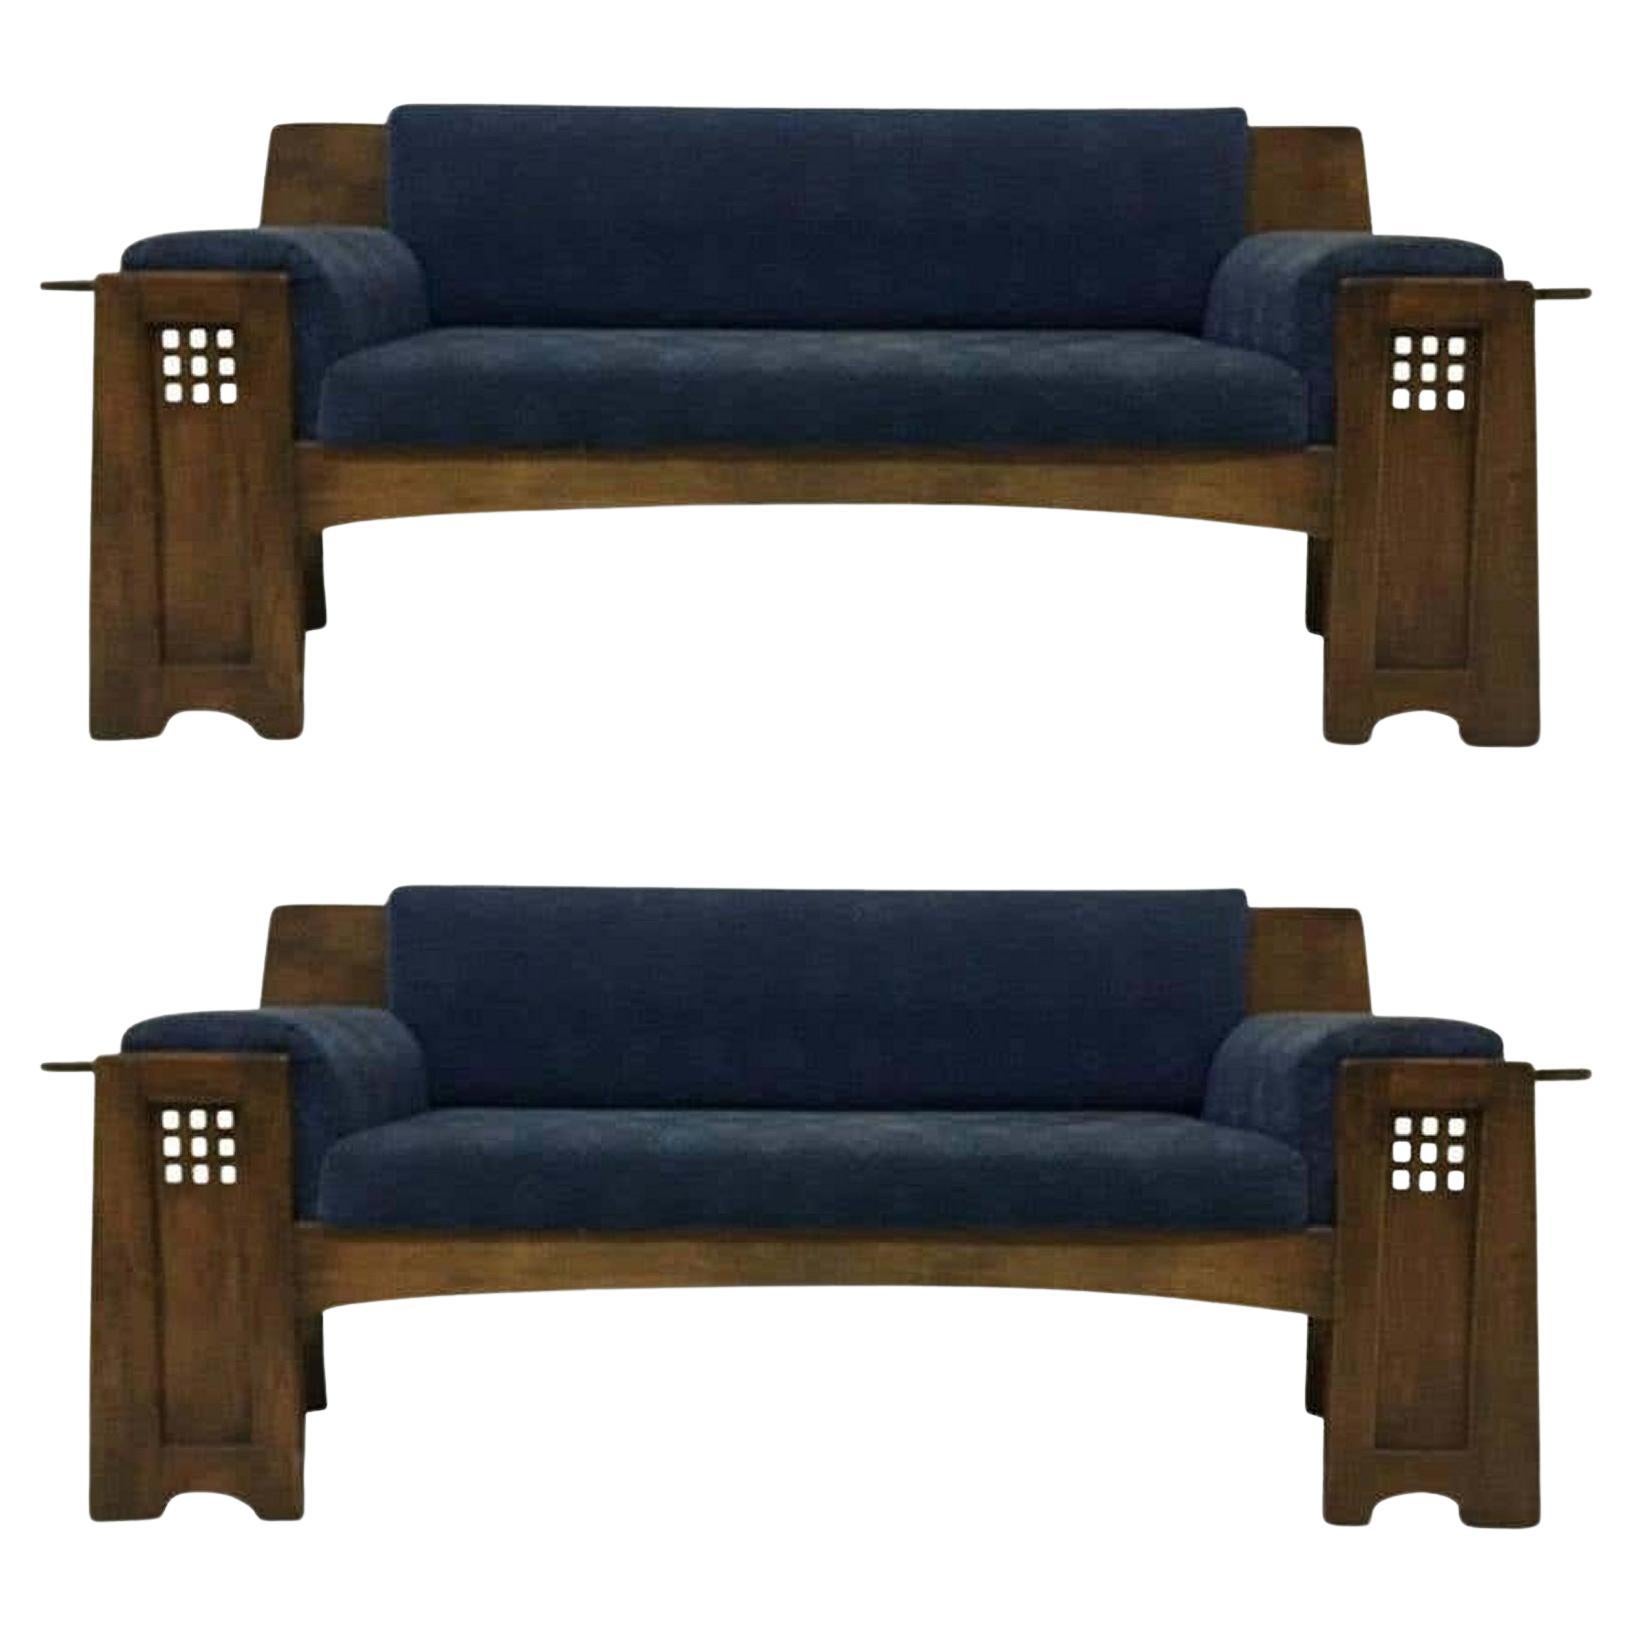 An Architectural Oak Settee or Sofa in the Style of Charles Rennie Mackintosh